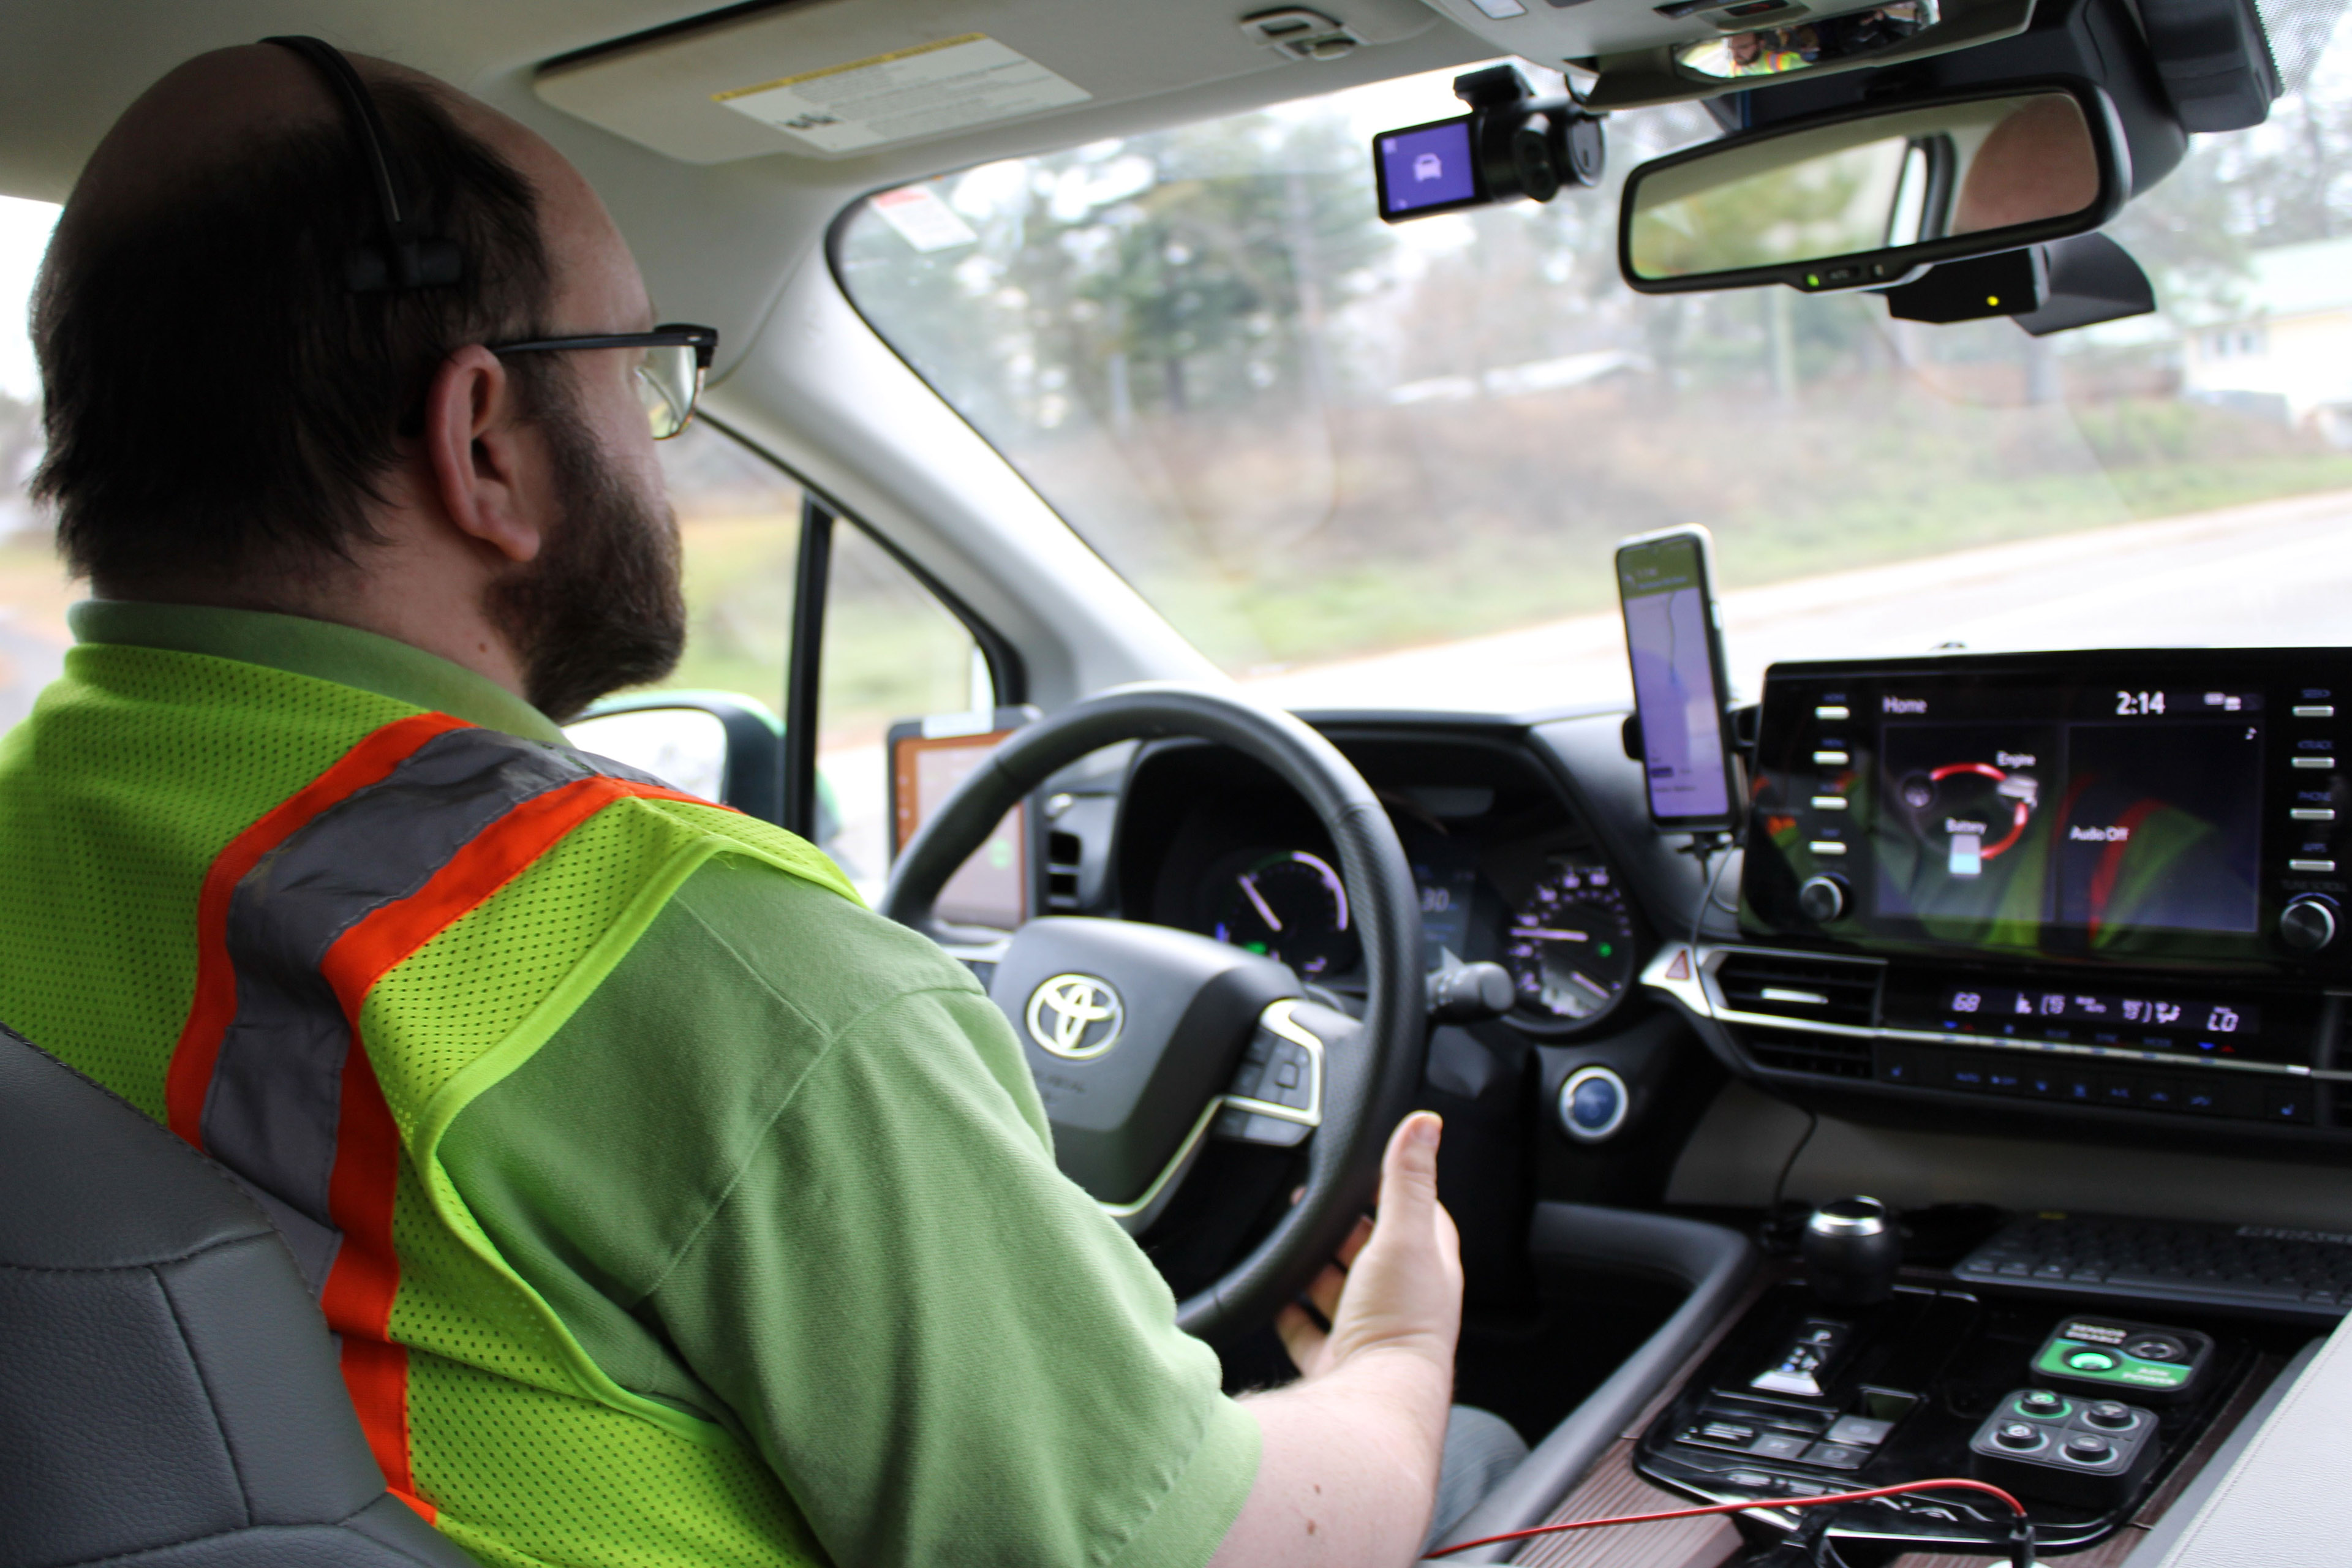 Operator Mark Haase sits in the driver's seat of the goMARTI self-driving vehicle. He keeps his hands cupped around the steering wheel as the van’s computer system drives.